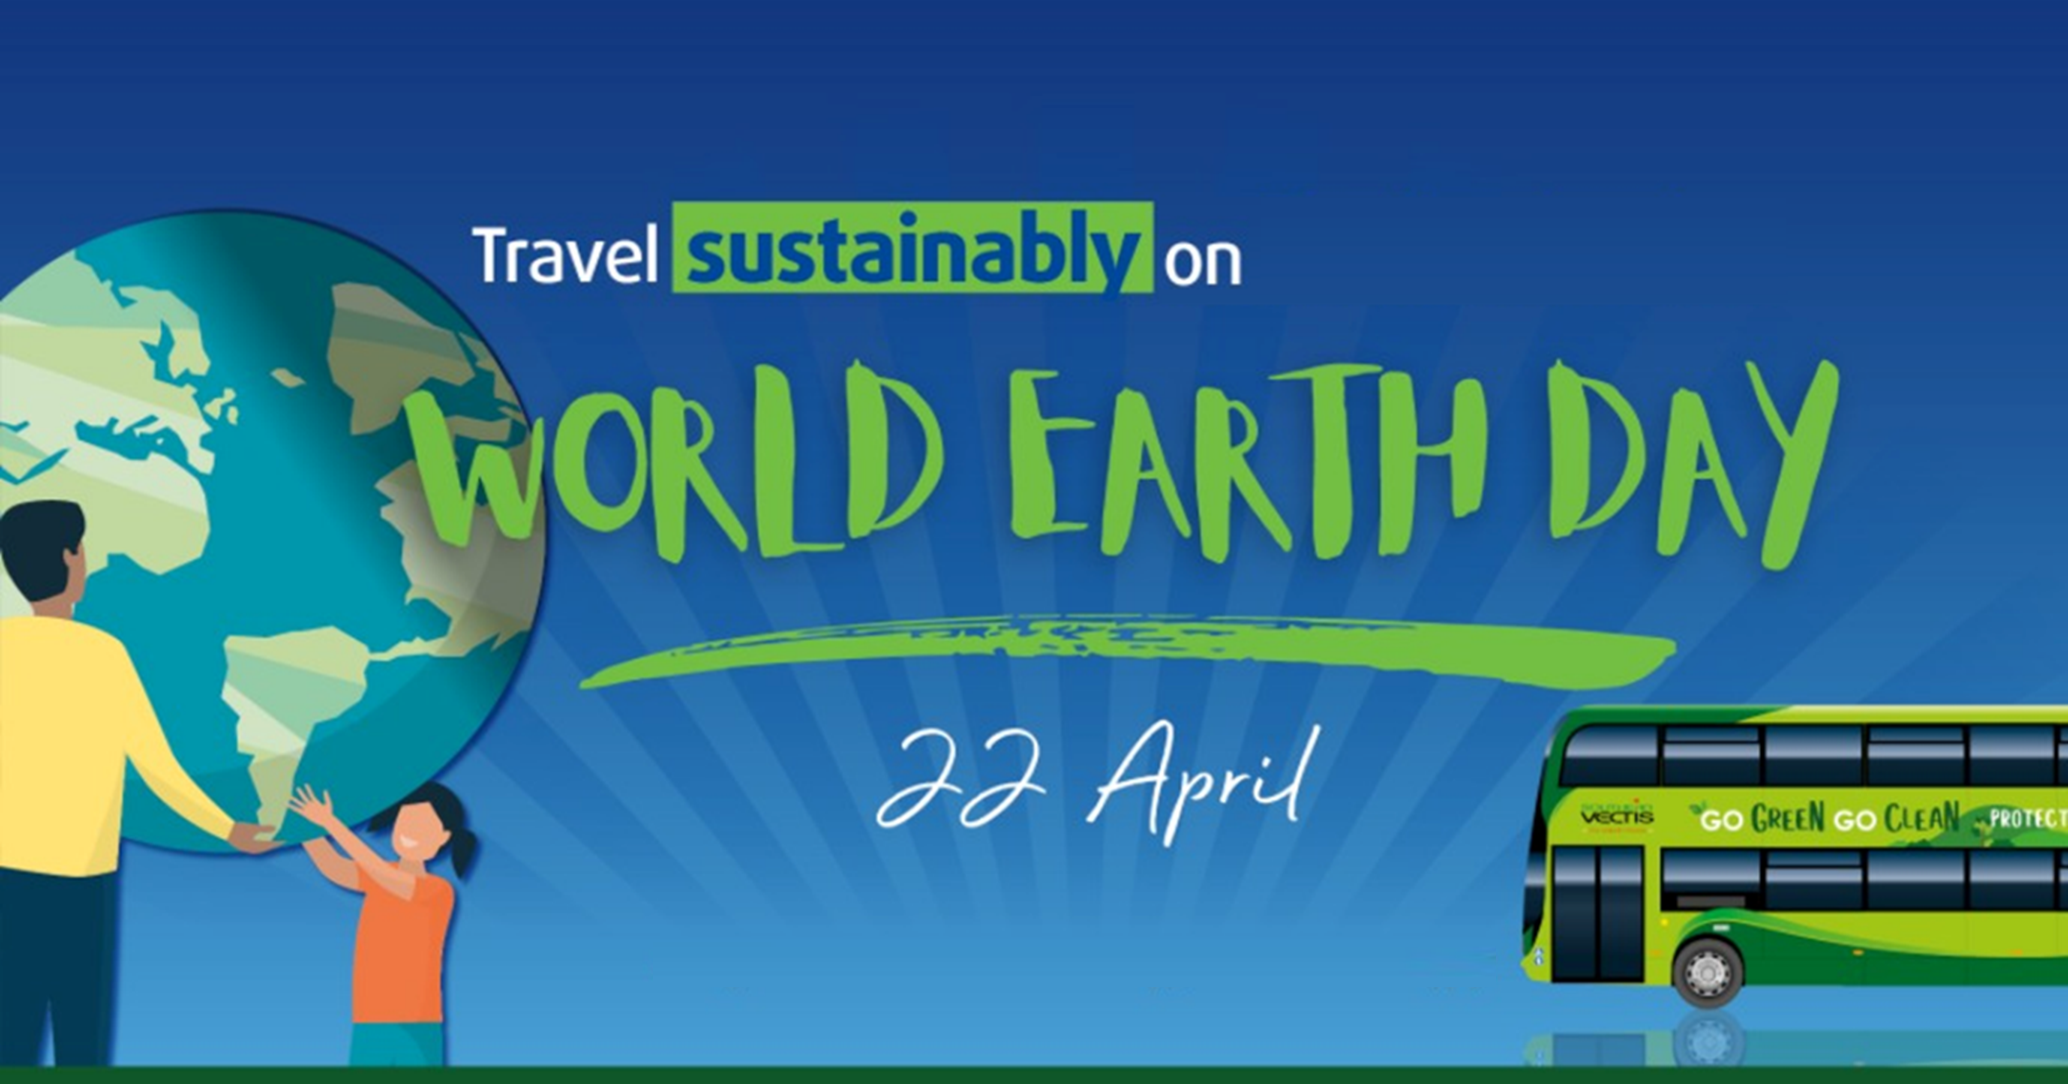 world earth day 22 april